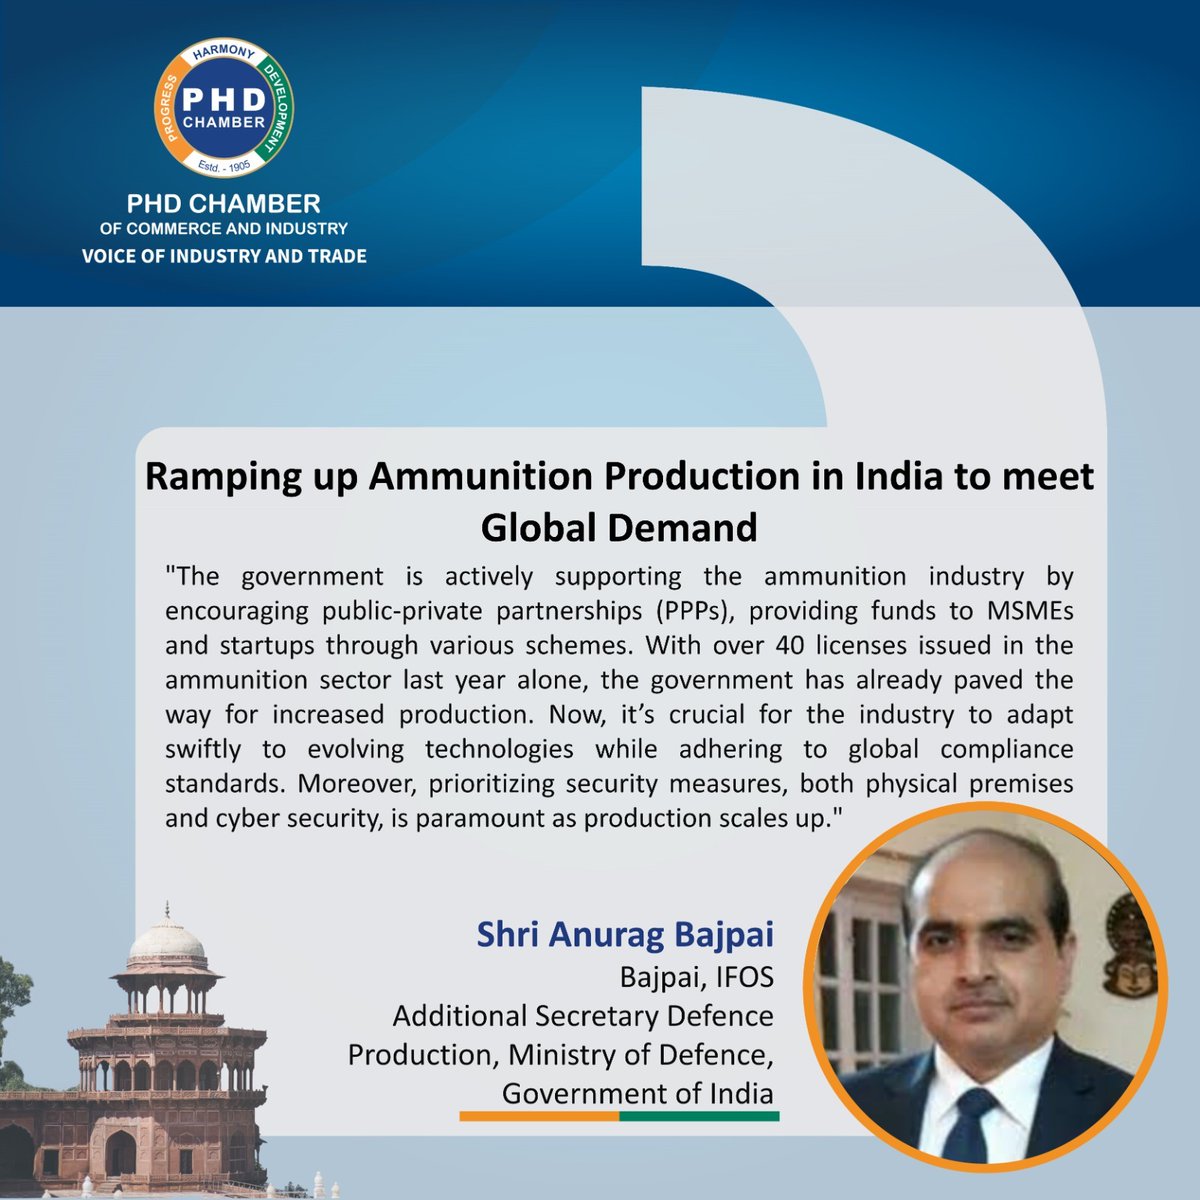 Ramping up Ammunition Production in India to meet Global Demand: Dive into the wisdom shared by our esteemed speakers during our recent event on ammunition production.
#phdcci #AmmunitionProduction #GlobalDemand #Innovation #Technology #DefenseIndustry #StrategicPartnerships